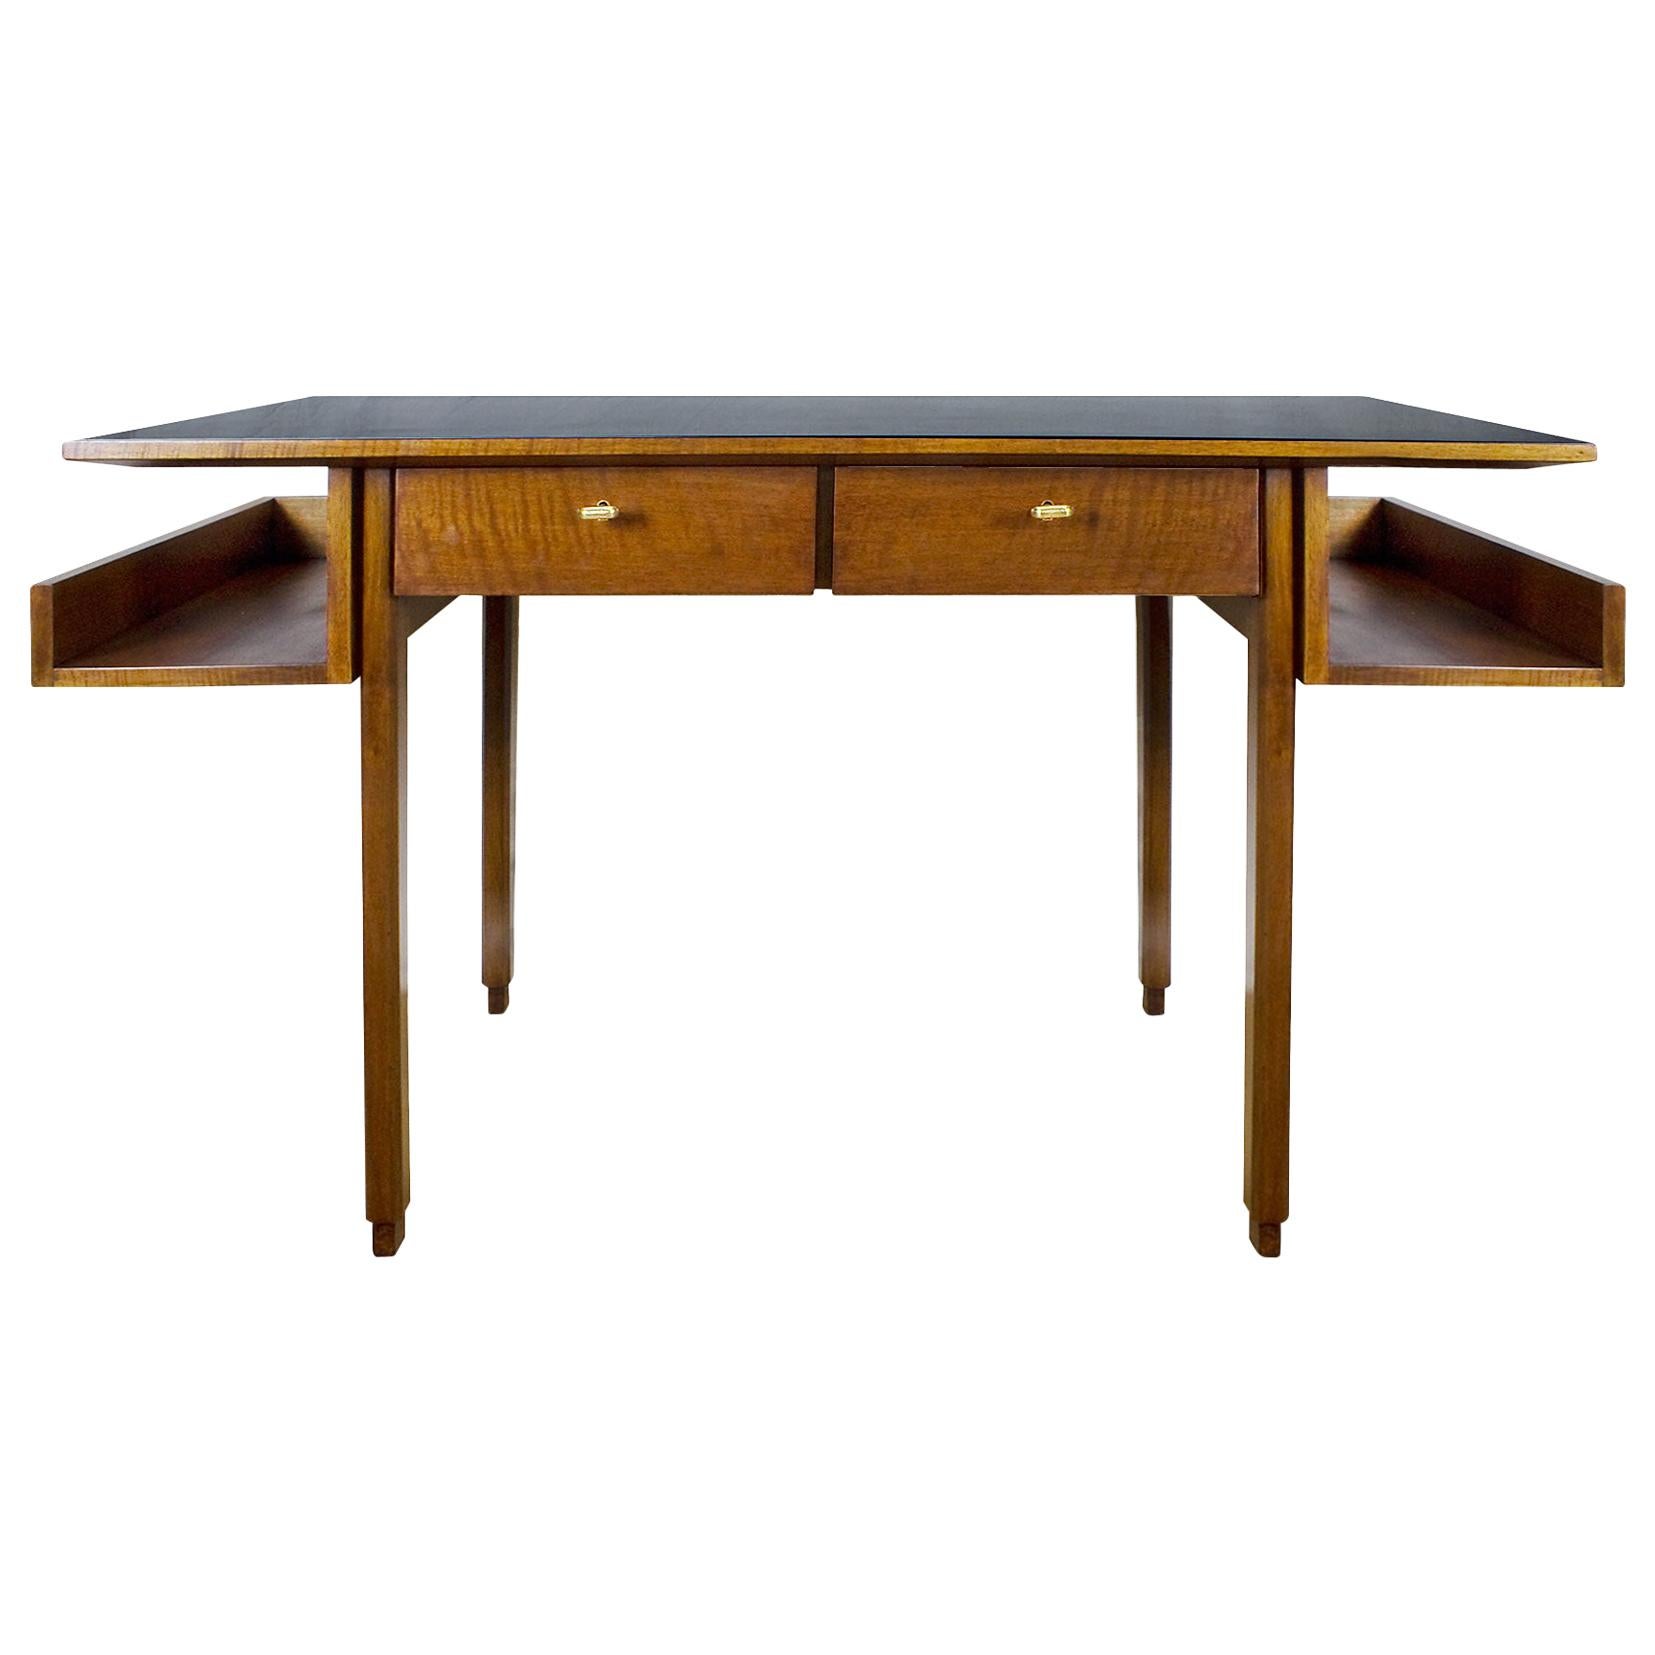 1970s Rationalist Desk by Pietro Bossi, Waxed Walnut, Brass, Formica, Italy